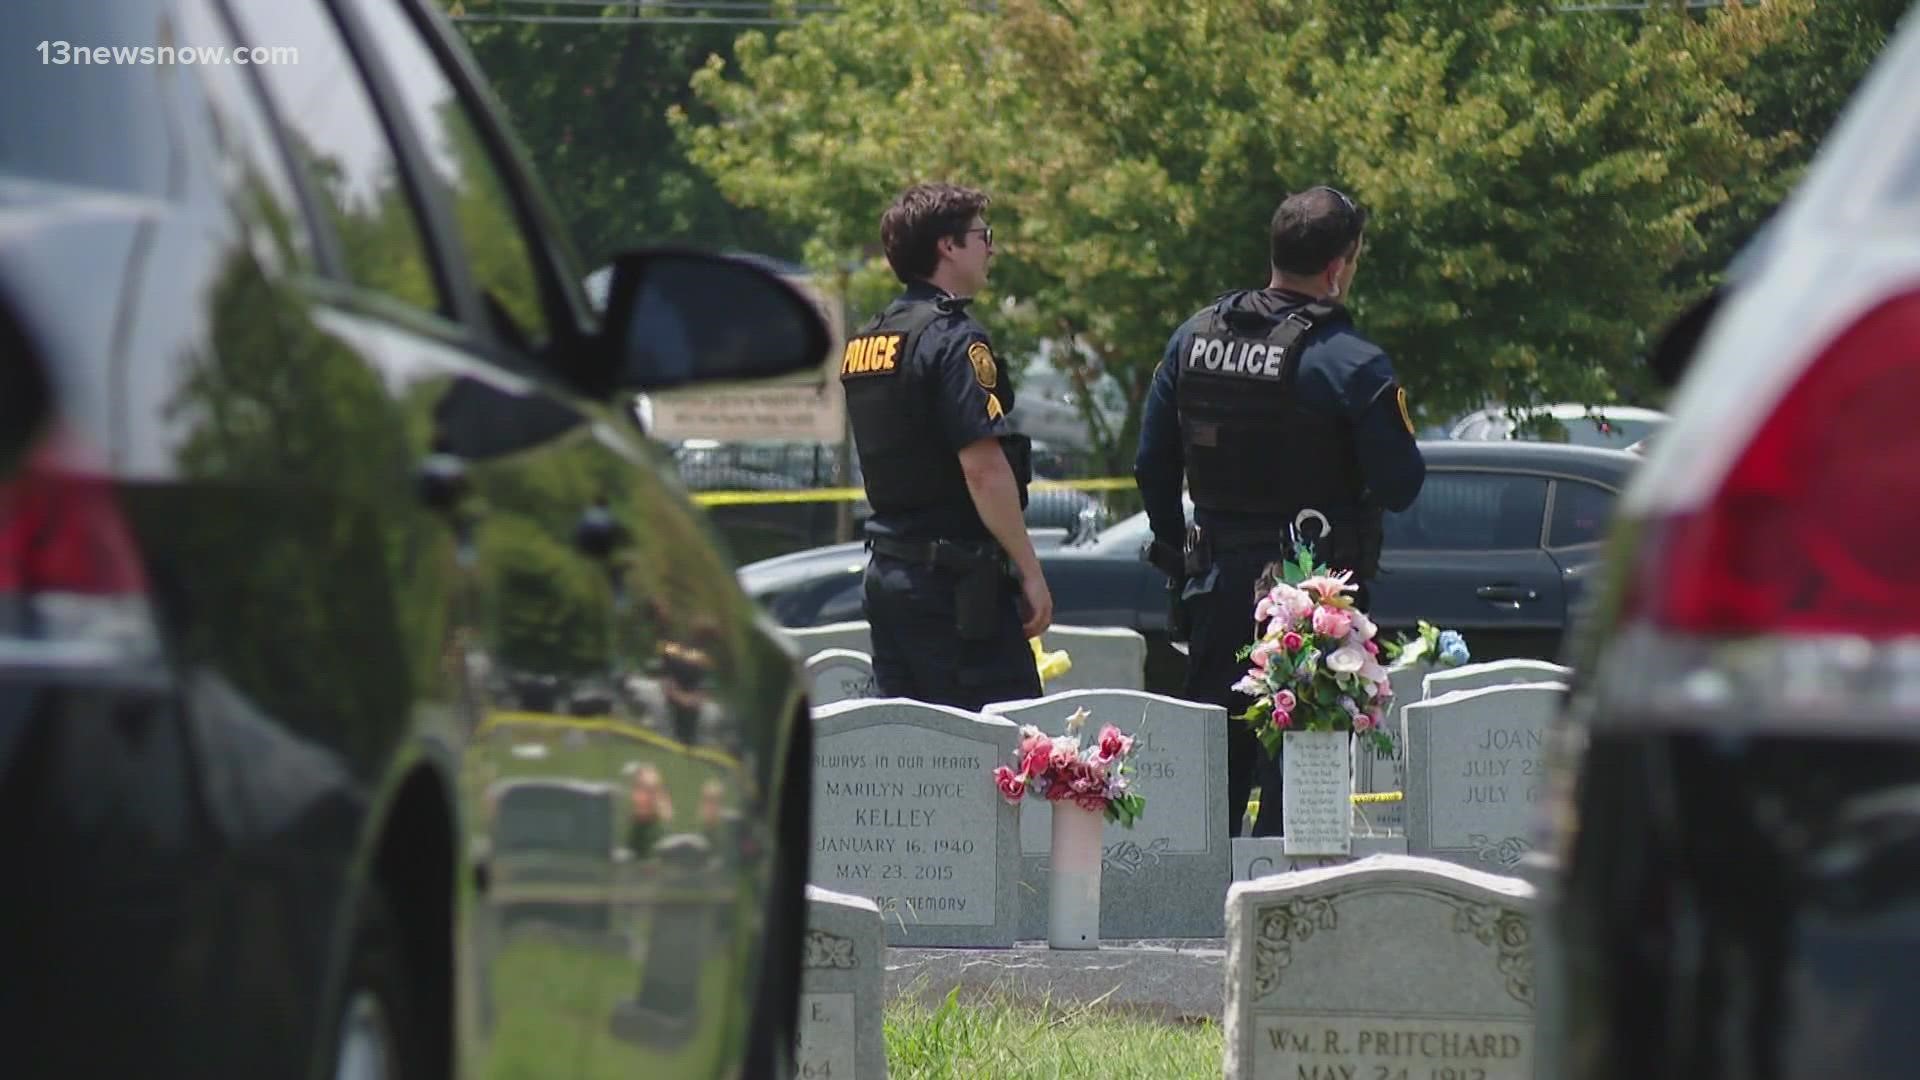 New details reveal why investigators may have already been looking for one of the two men arrested after a police shooting at a Norfolk cemetery.